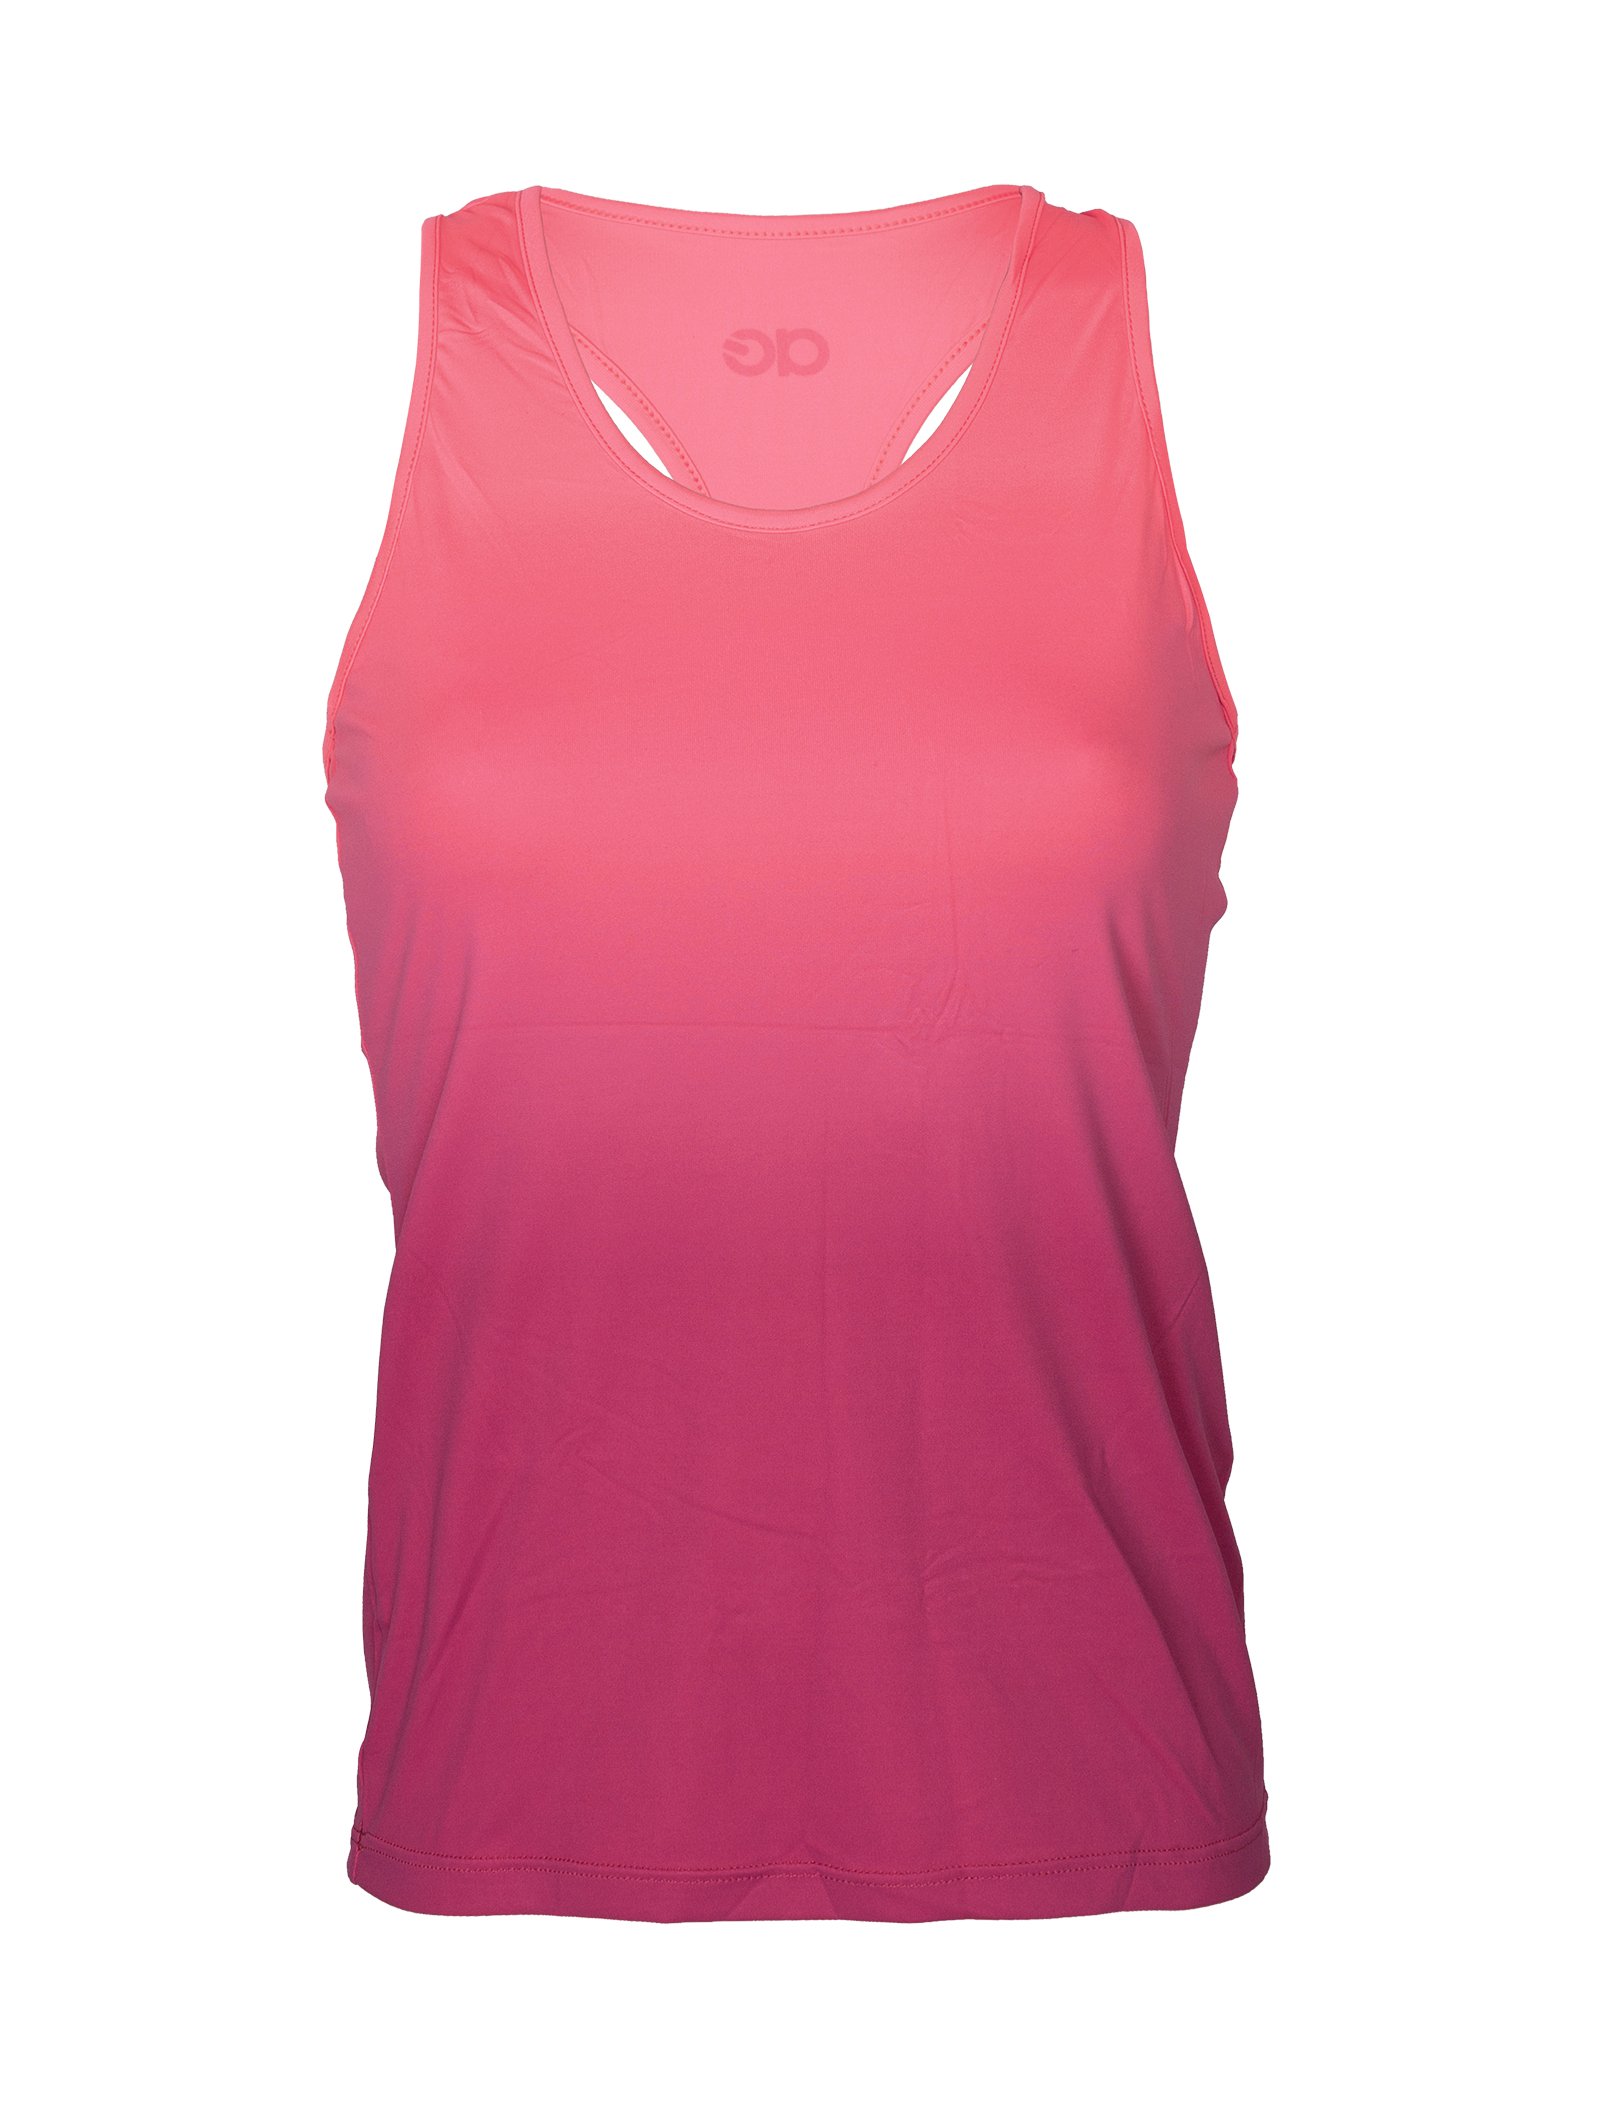 Fitness top Fitness - Skin Fit Pink - Brand Alto Giro